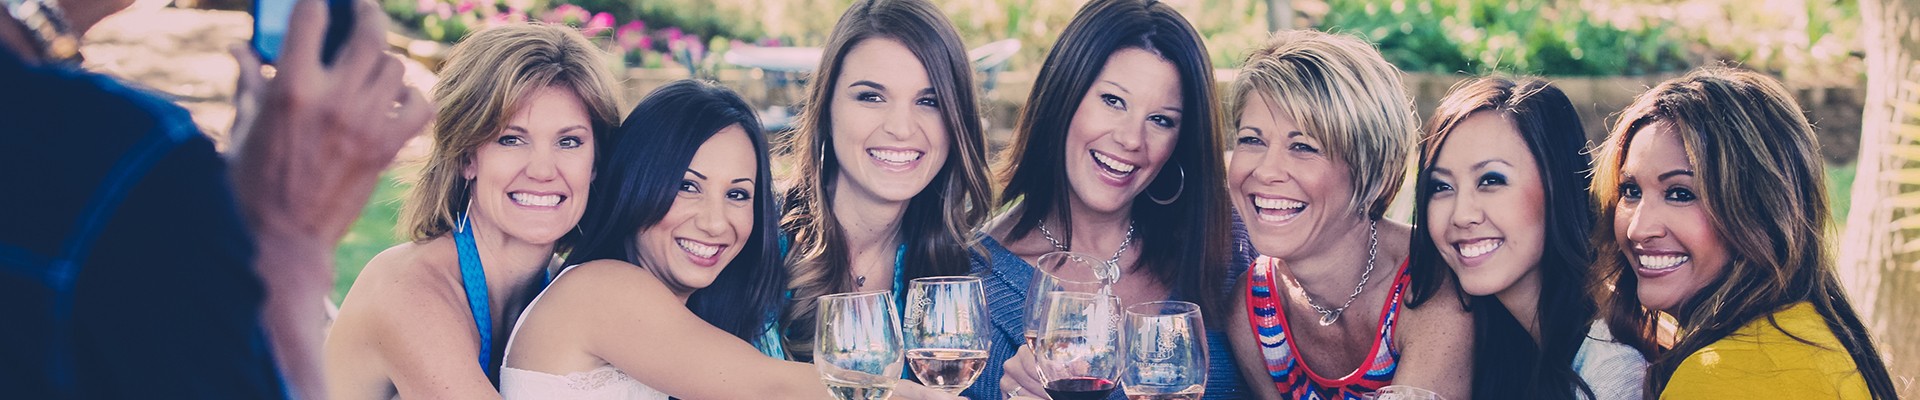 Girls taking a selfie while Wine Tasting in Paso Robles' Eberle Winery